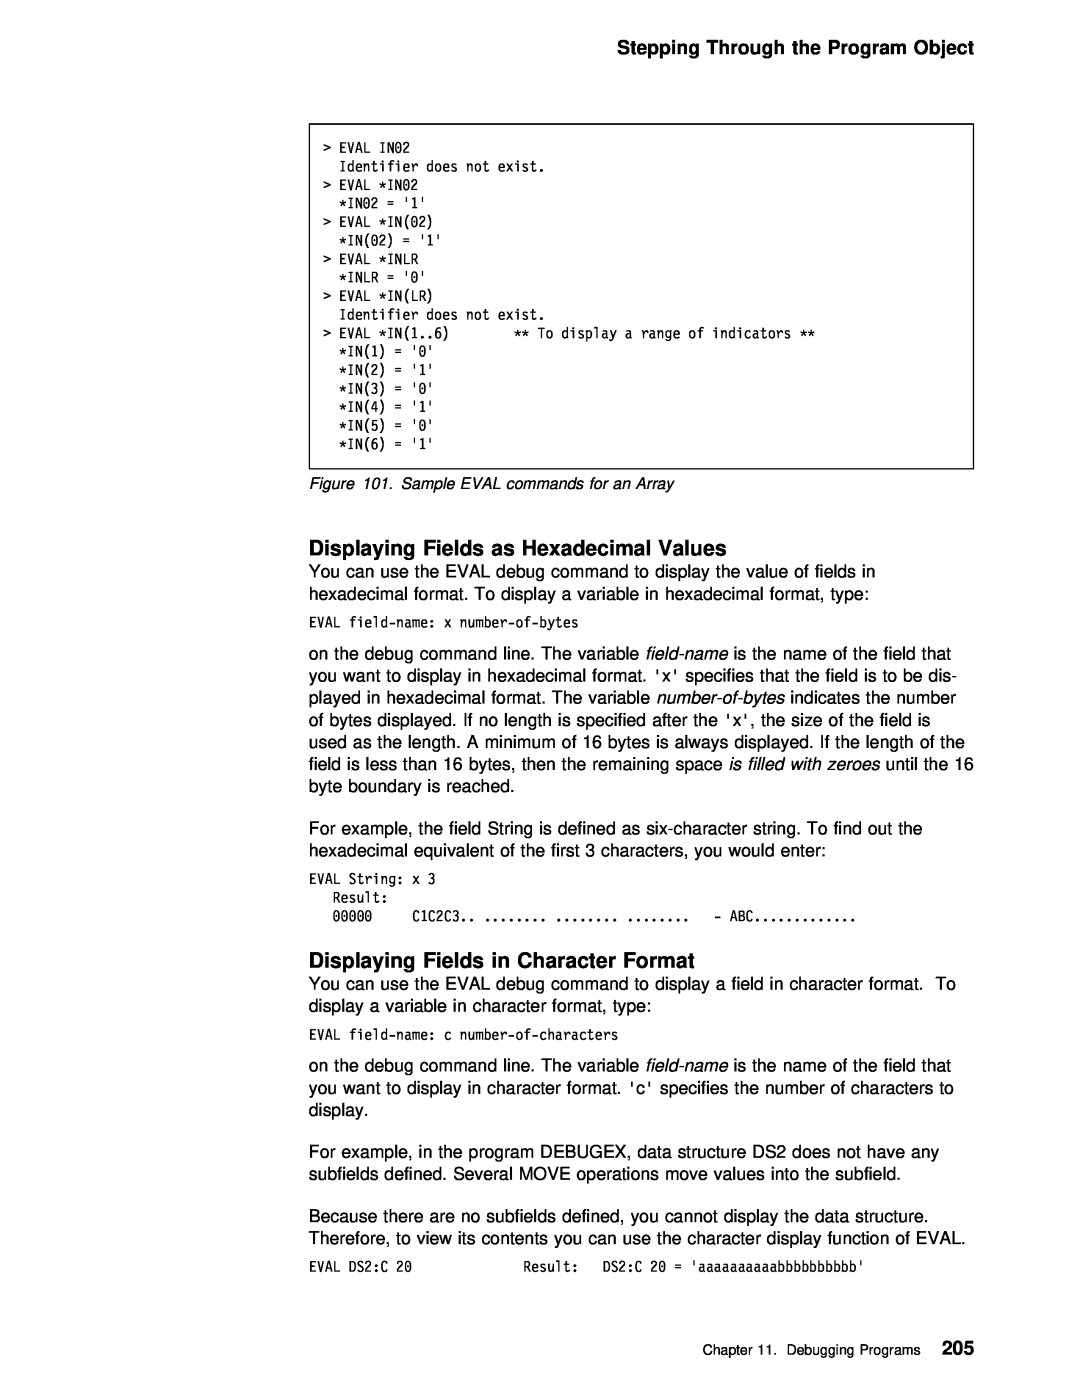 IBM AS/400 manual Displaying Fields as Hexadecimal Values, in Character Format, Stepping Through the Program Object 